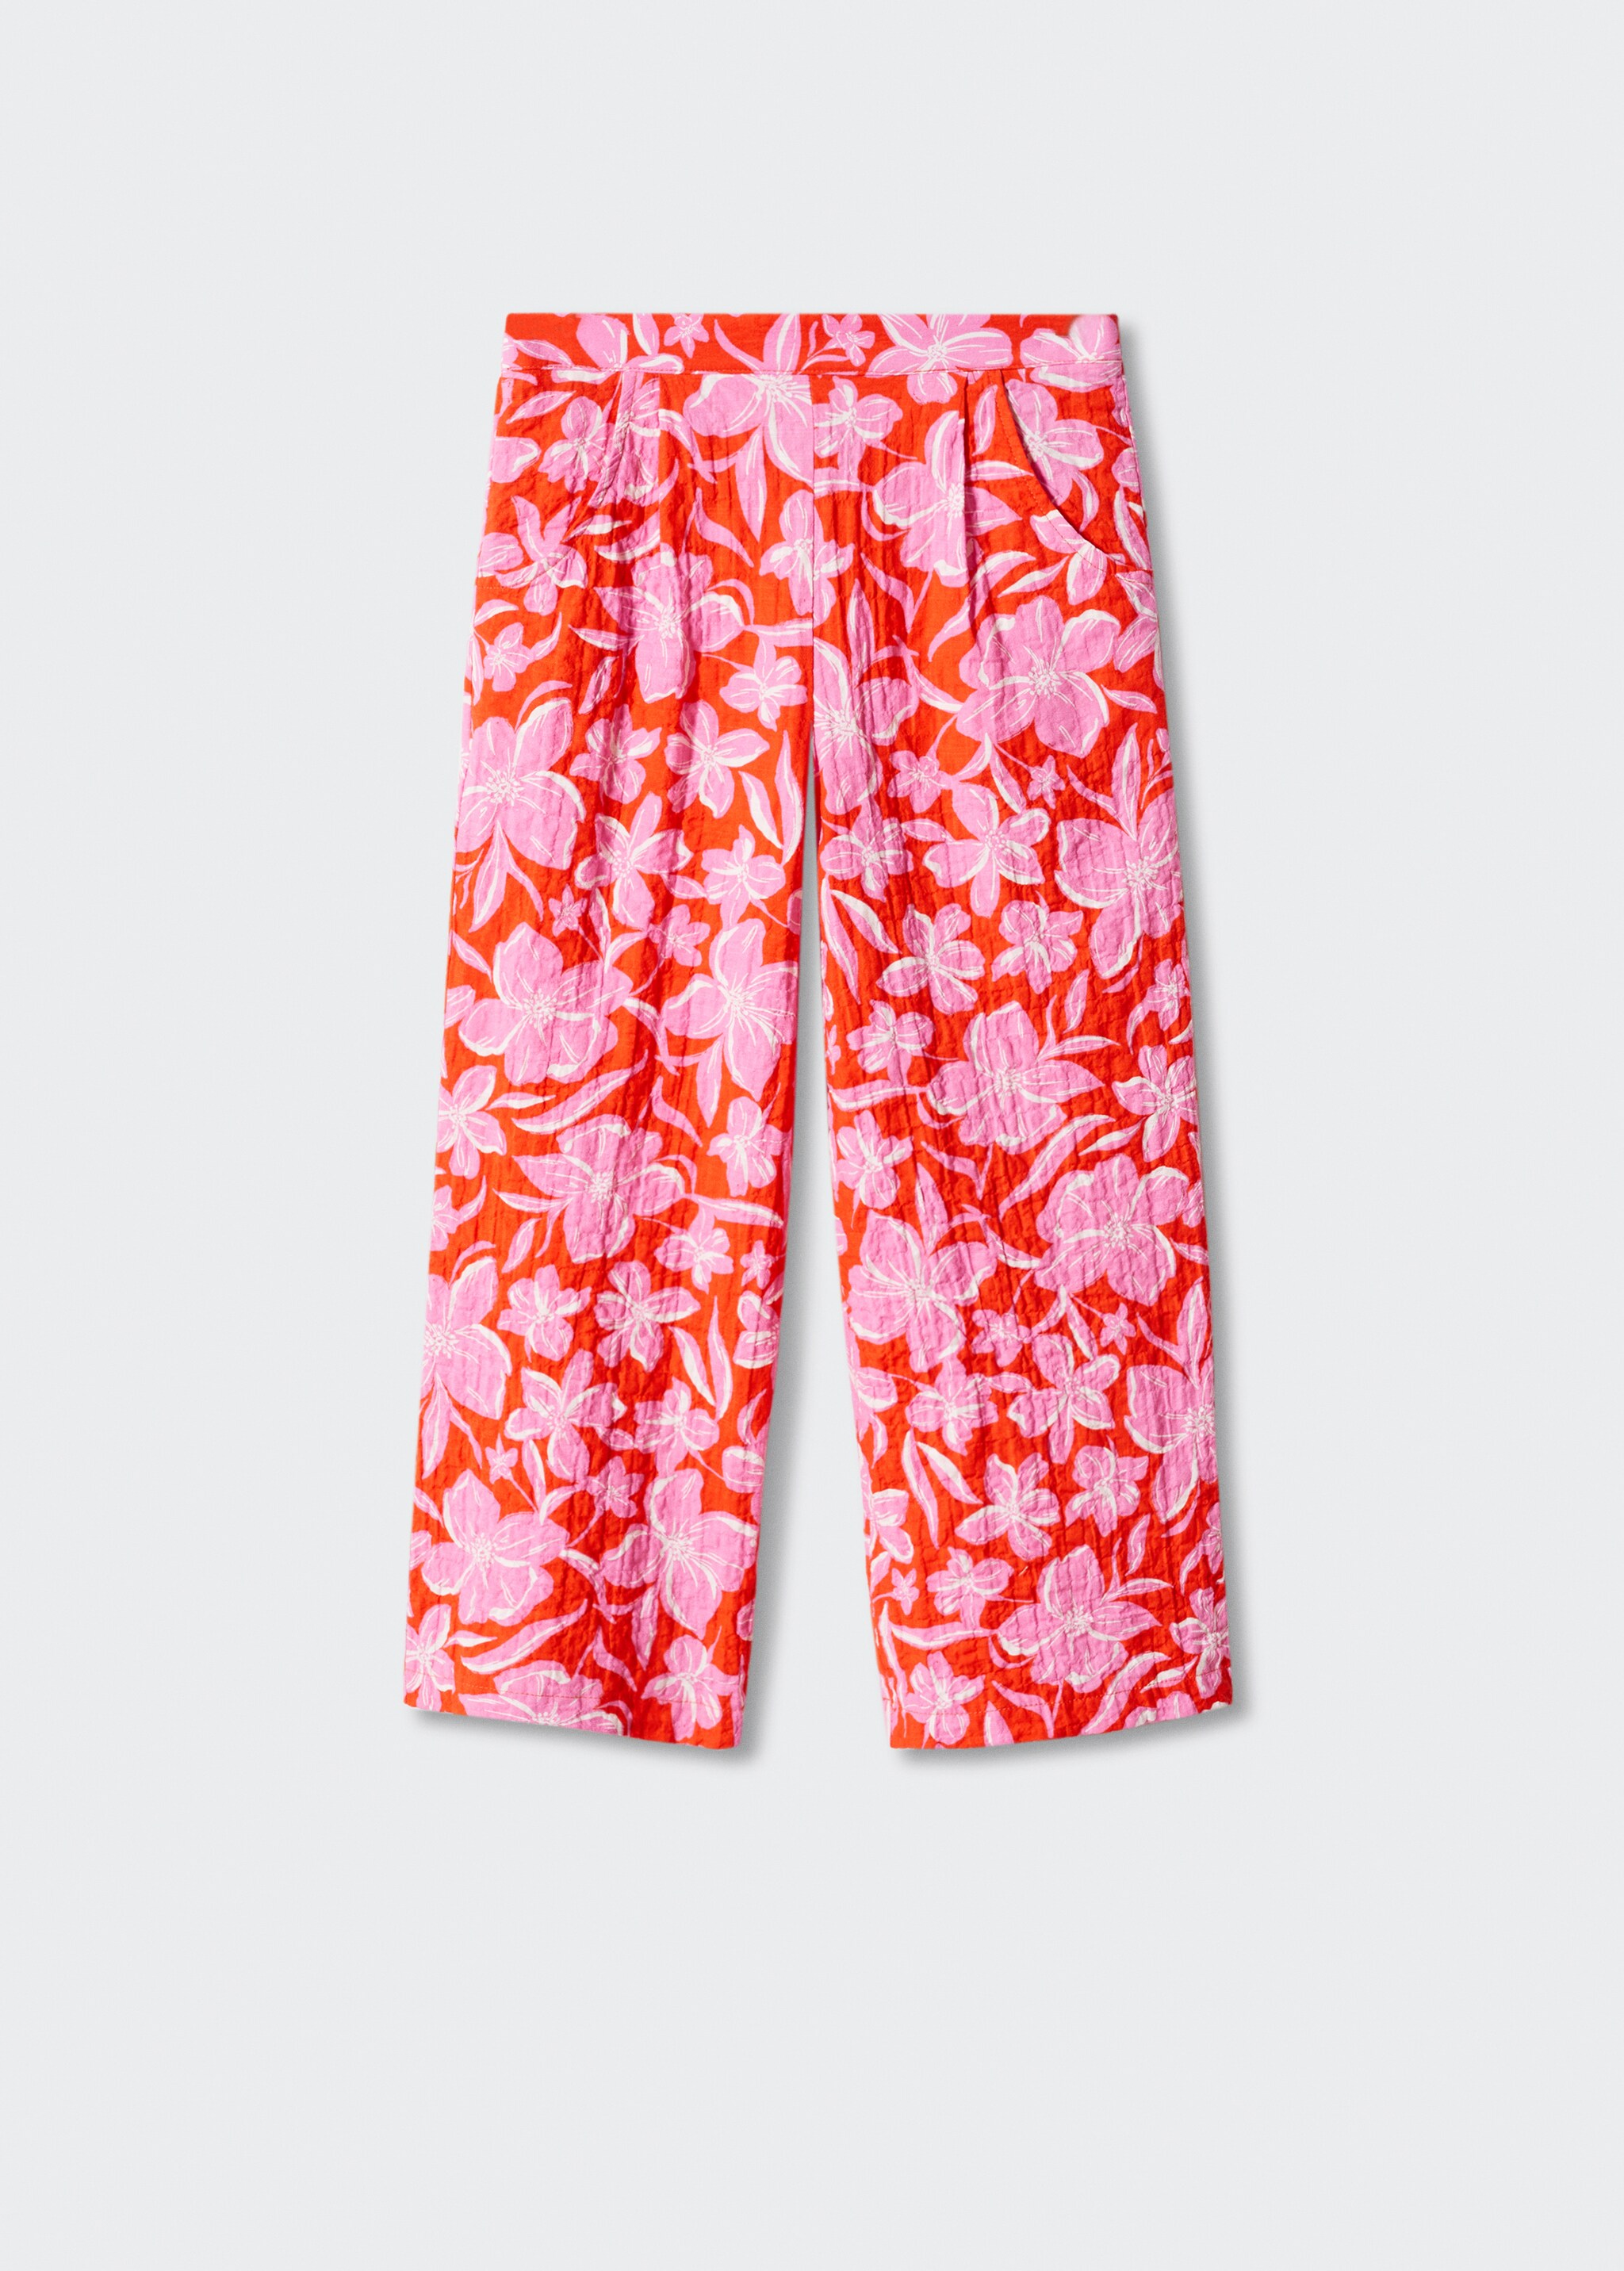 Flower culottes trousers - Article without model